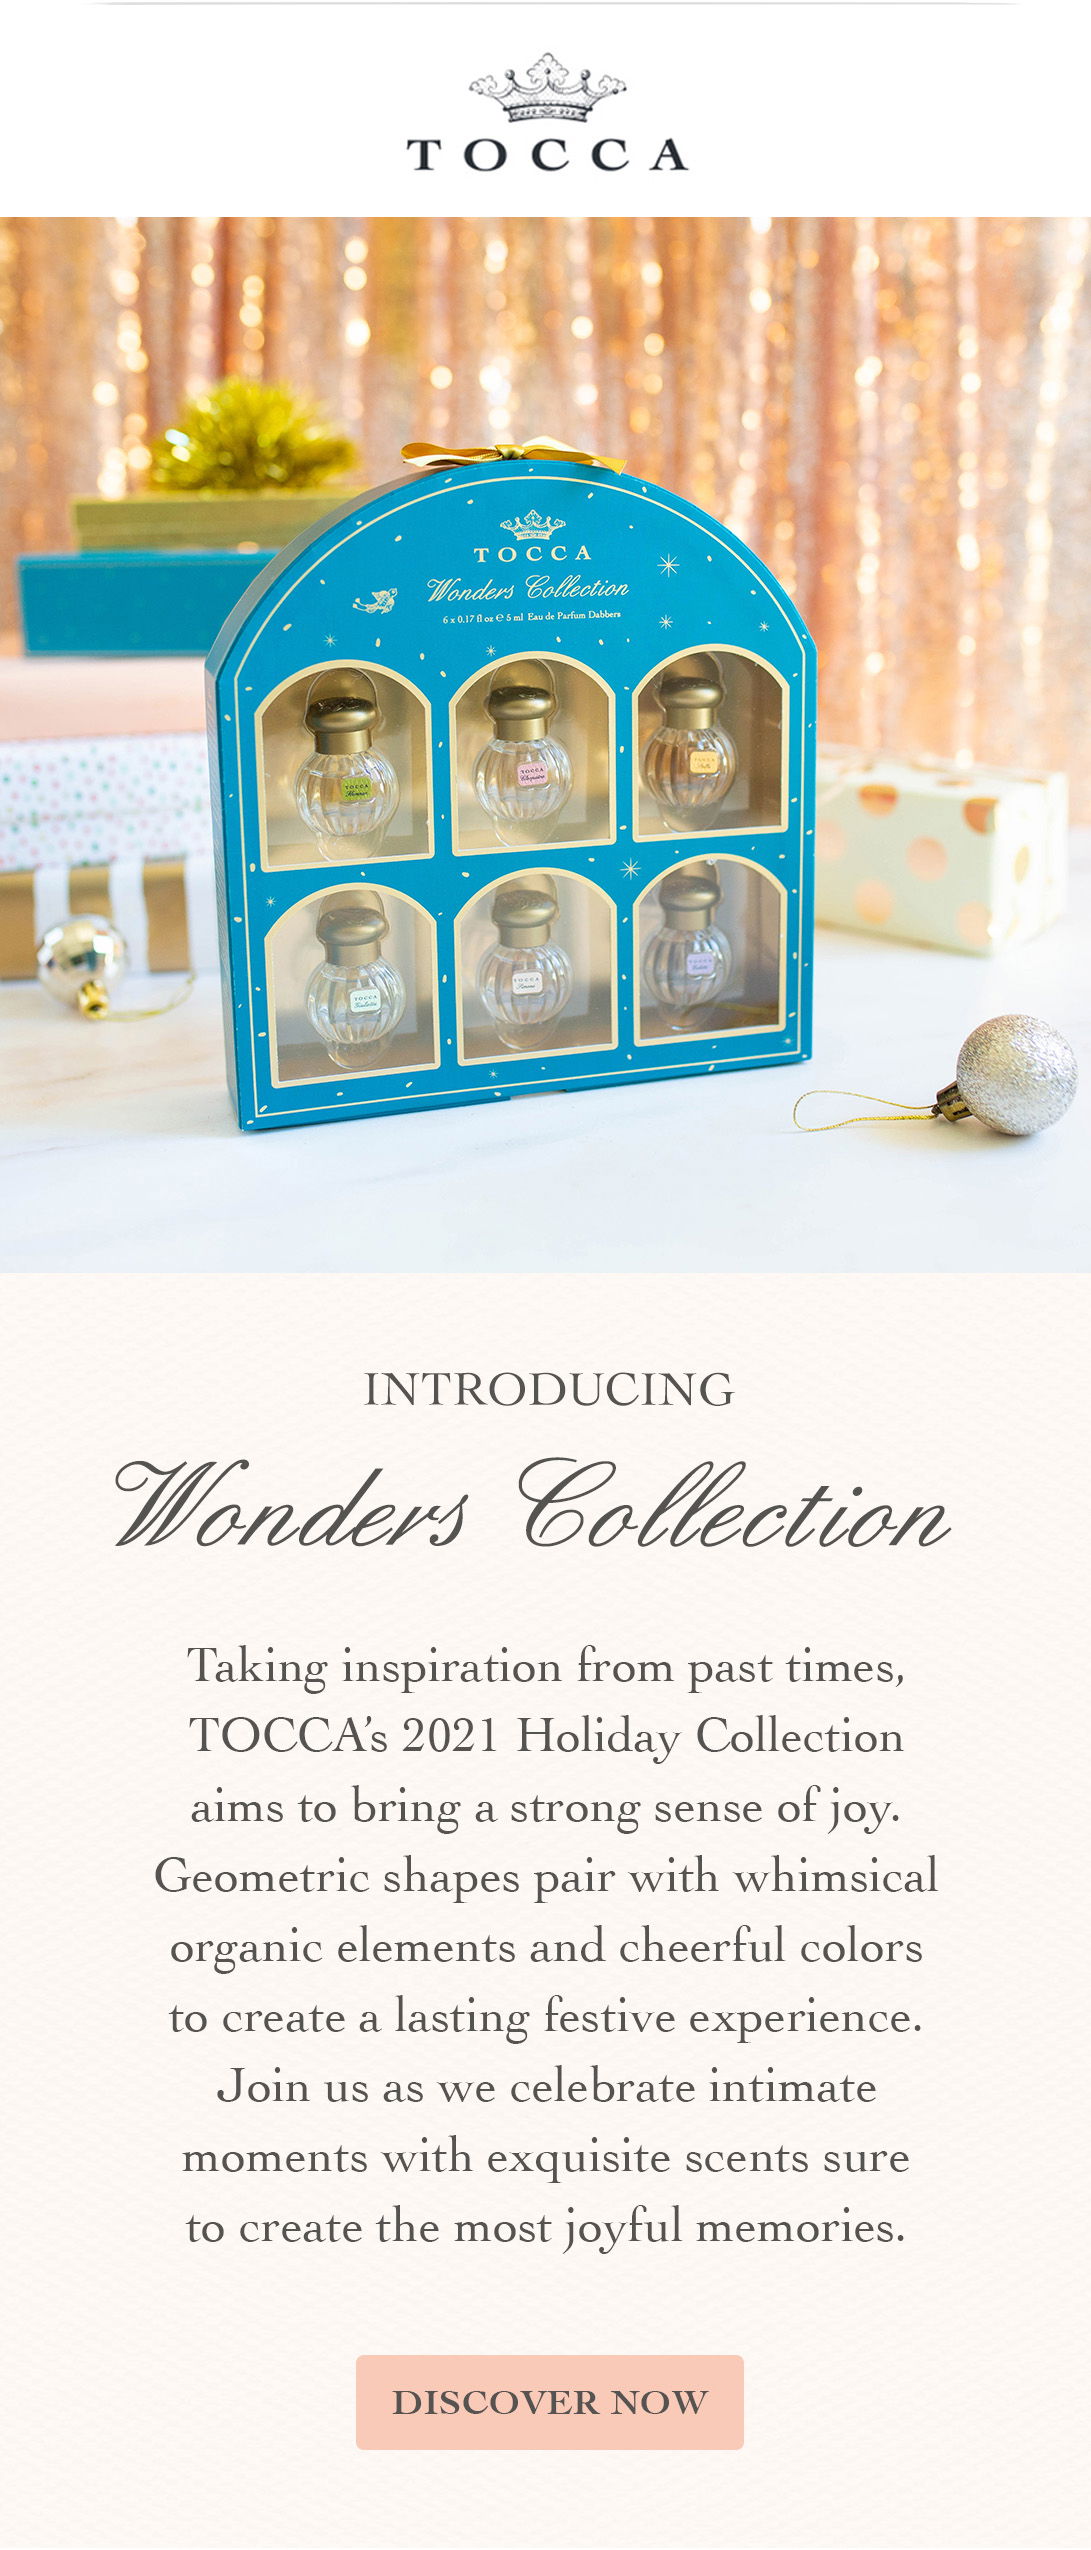 Tocca: Introducing TOCCA Wonders Collection | Milled